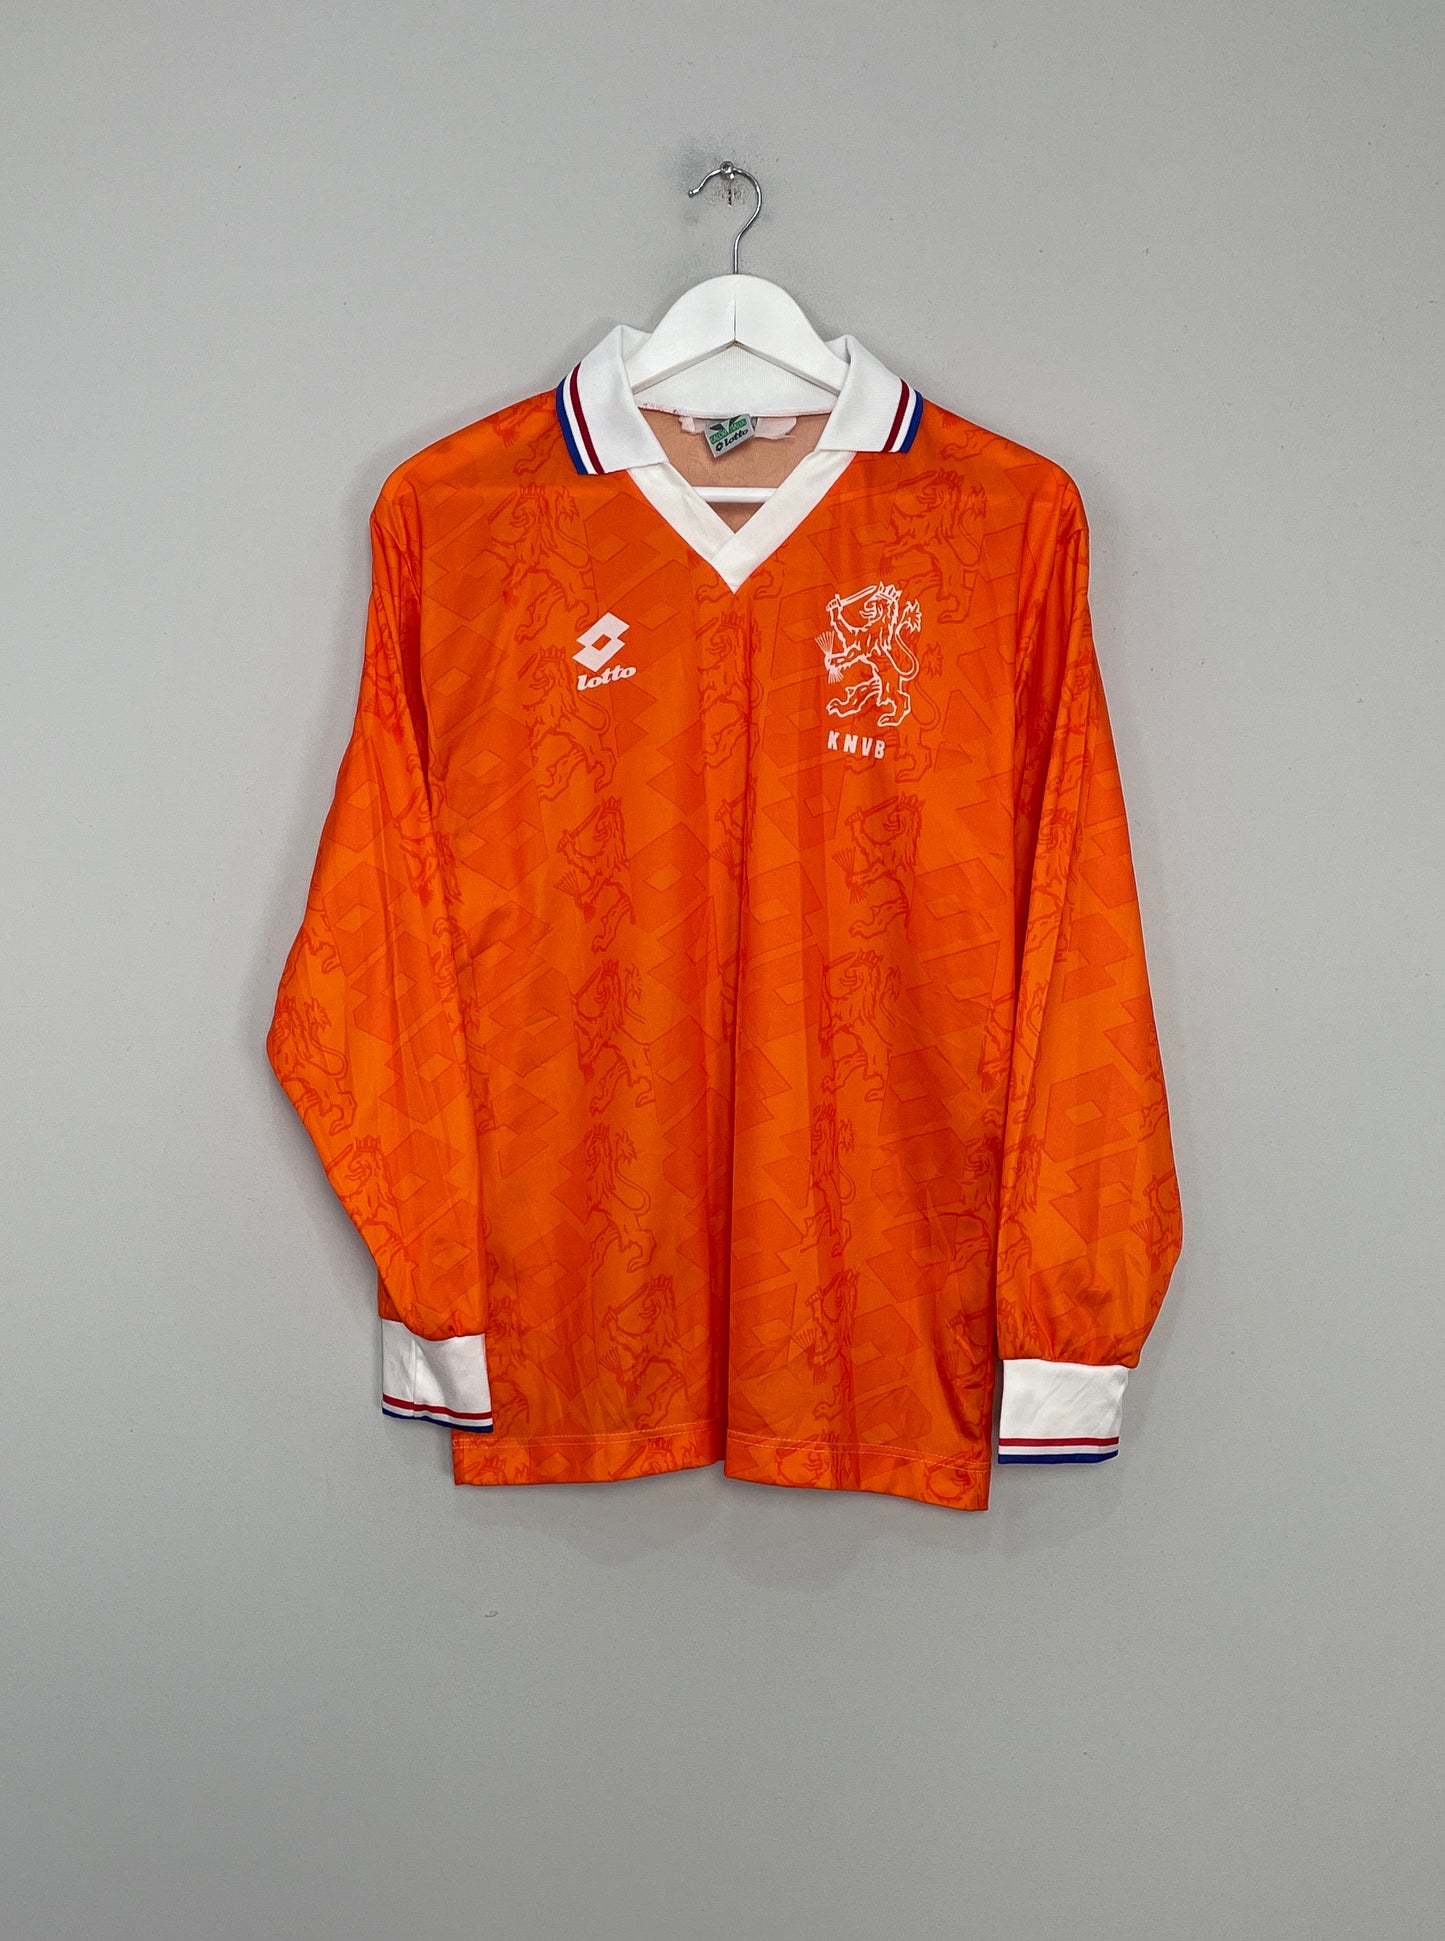 1994/95 NETHERLANDS #11 L/S HOME SHIRT (M) LOTTO